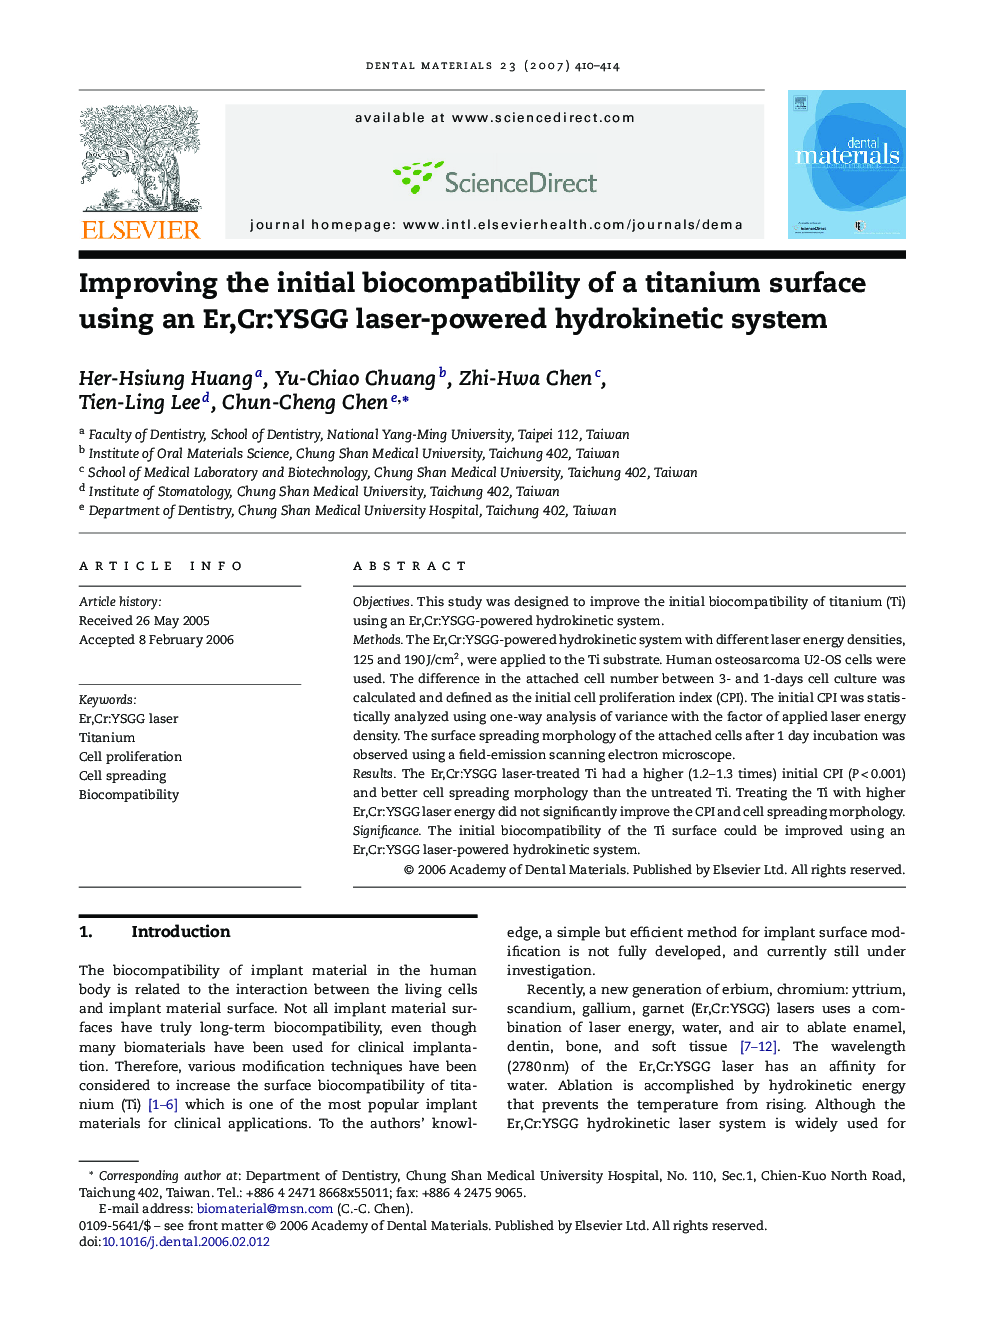 Improving the initial biocompatibility of a titanium surface using an Er,Cr:YSGG laser-powered hydrokinetic system